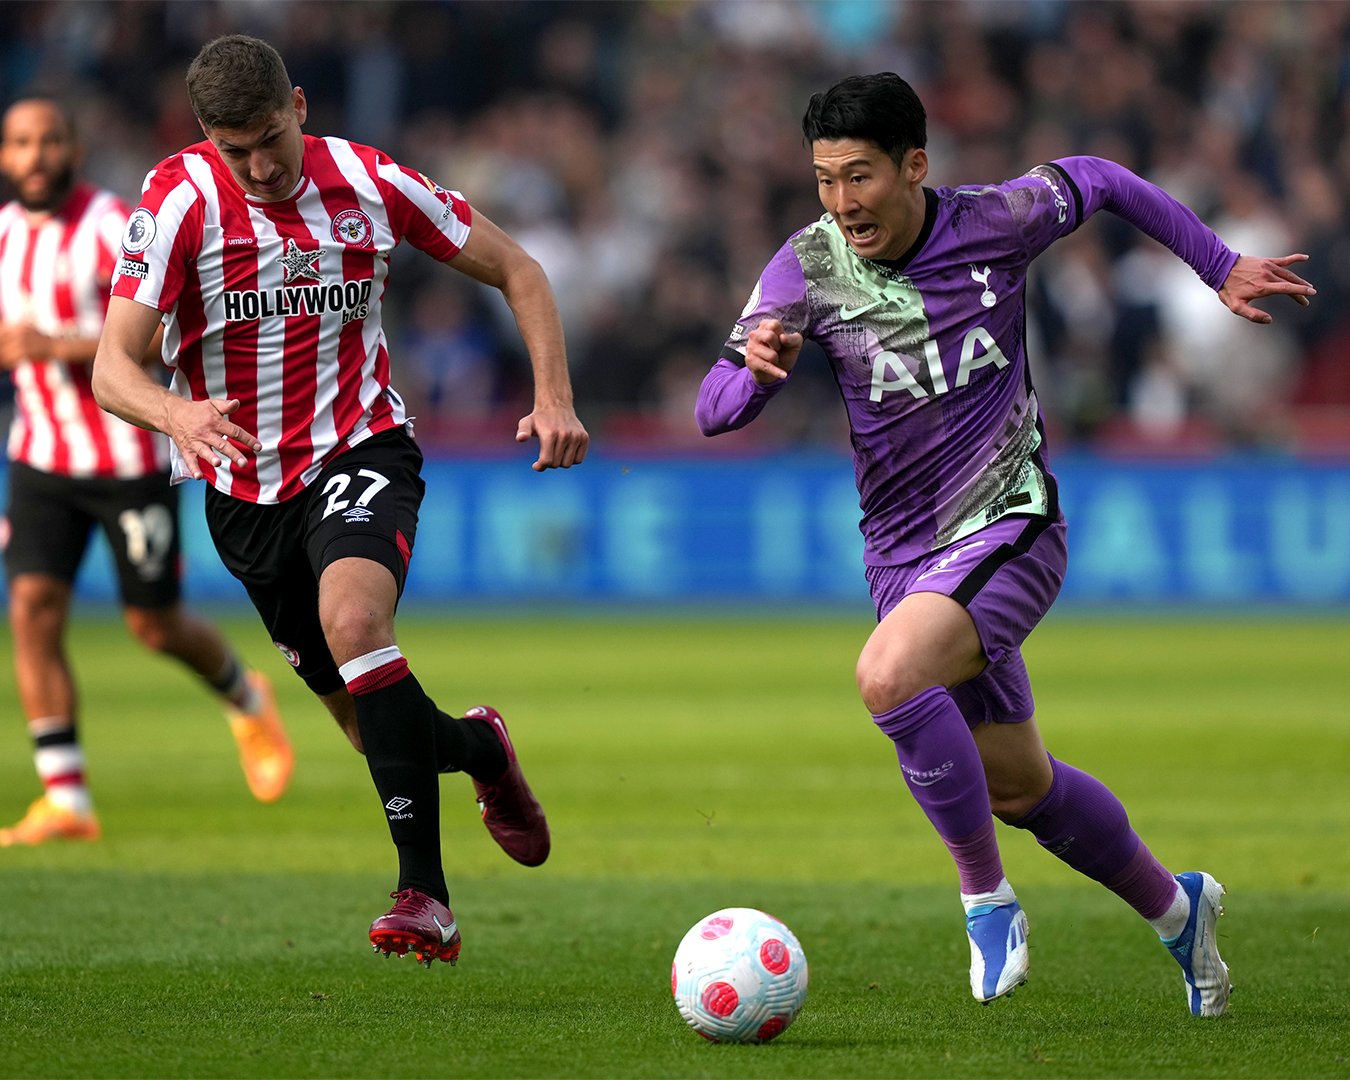 Premier League Highlights: Spurs held to a 0-0 draw against Brentford in a crucial Top-4 clash, Check Brentford vs Spurs HIGHLIGHTS